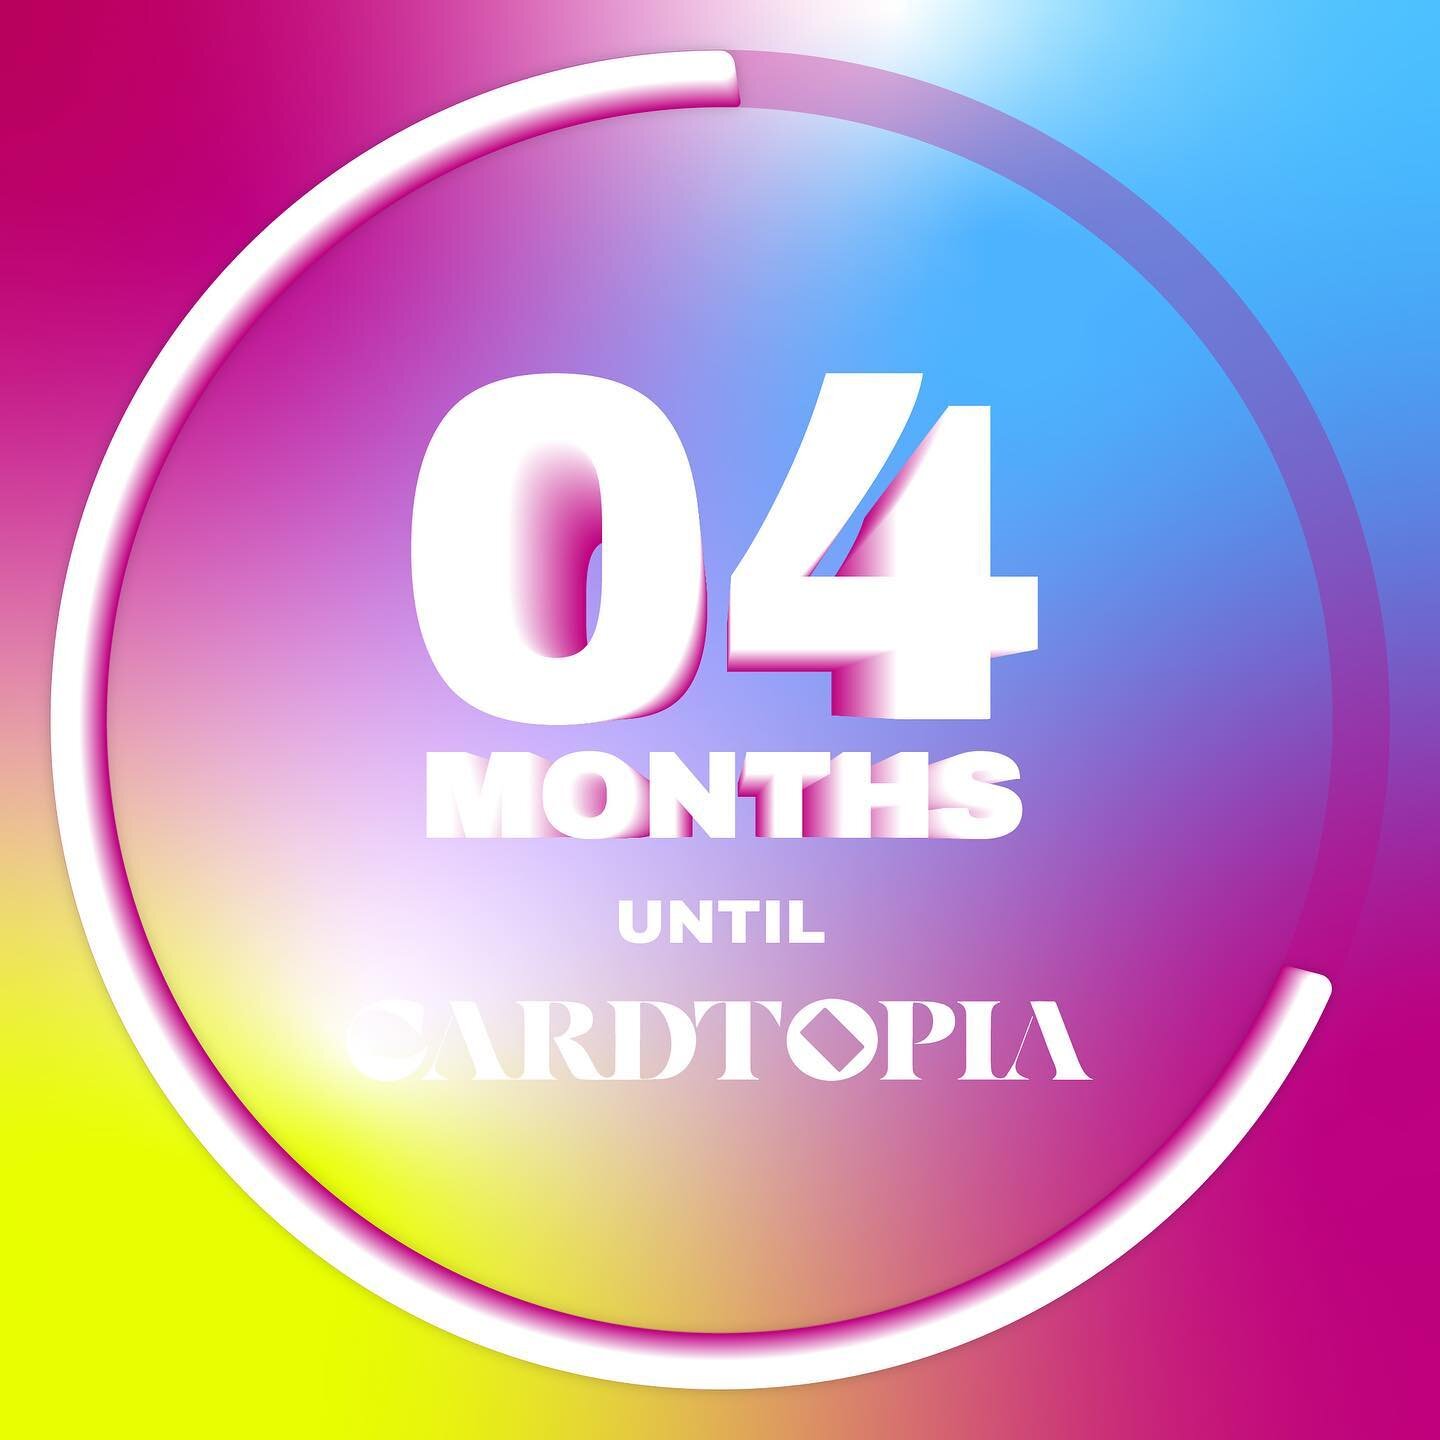 🗓️ Cardtopia 2023 Countdown: Only 4 Months Left! ✨

The Ultimate Gathering of Card Enthusiasts is getting closer than ever. Stay tuned this month for exciting announcements that will be revealed.

Don't wait any longer and secure your spot now to be